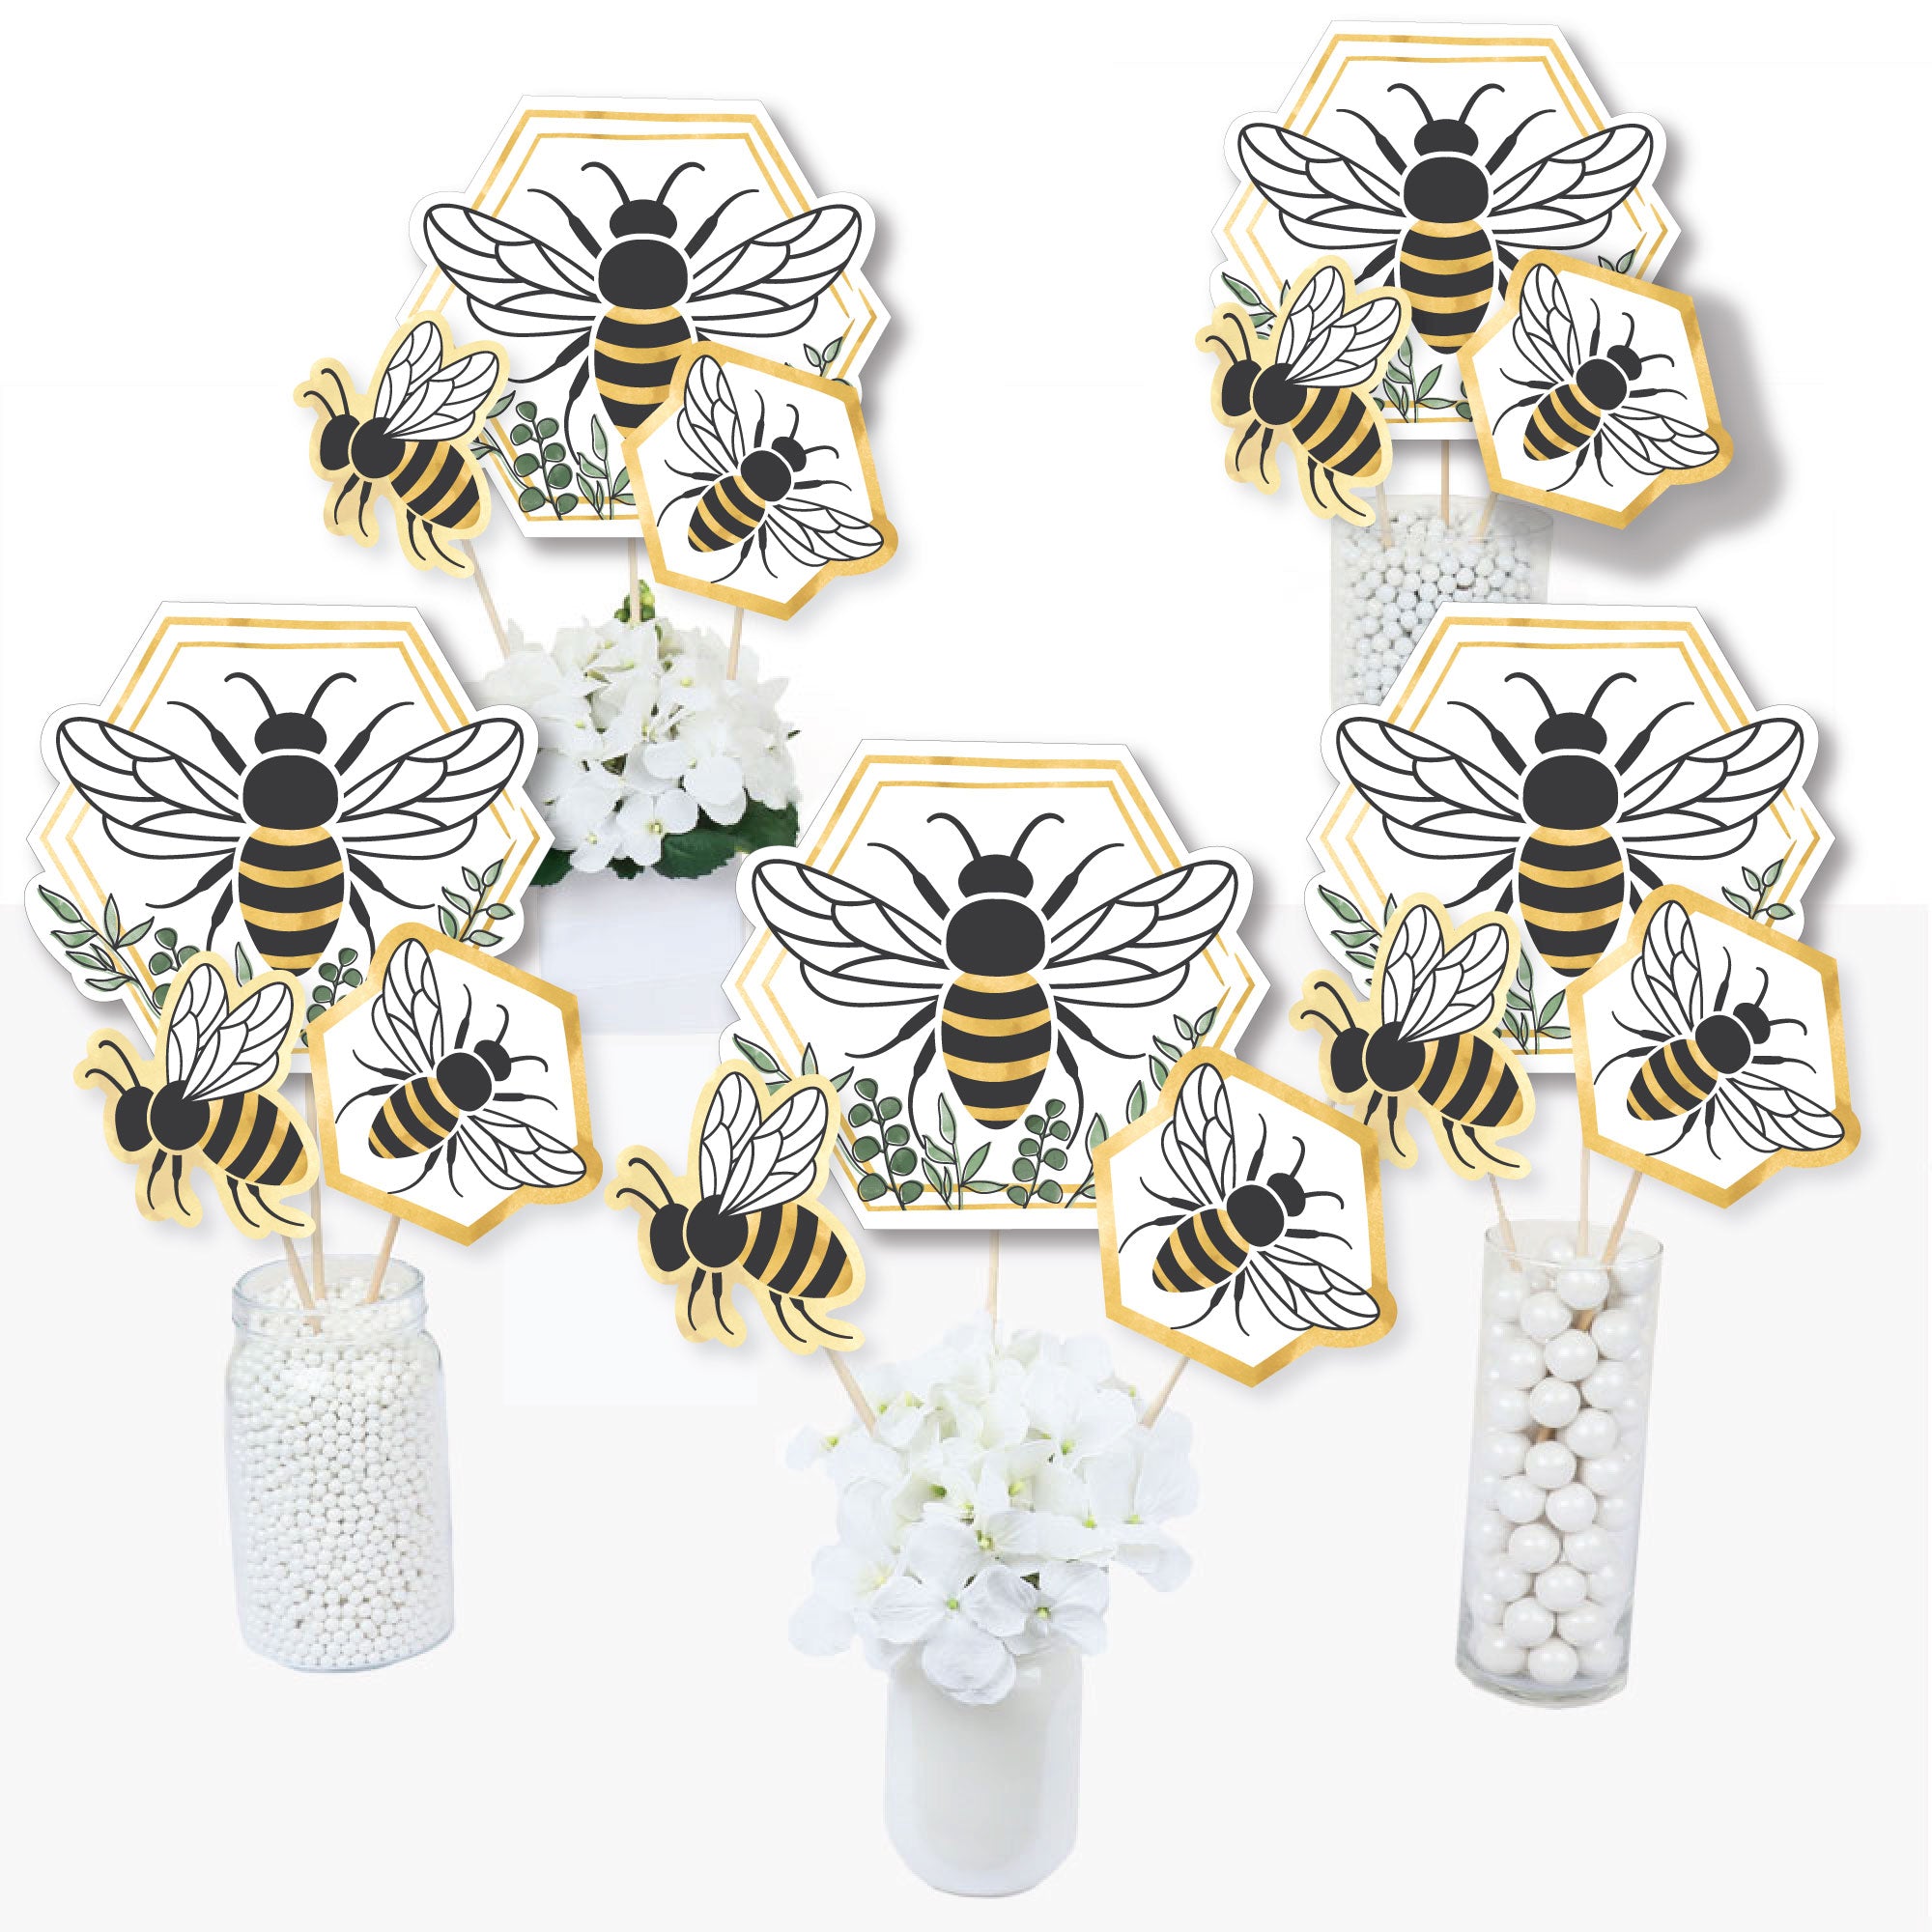 Set of 24 Bumble Bee Table Decorations, Centerpieces, Great for